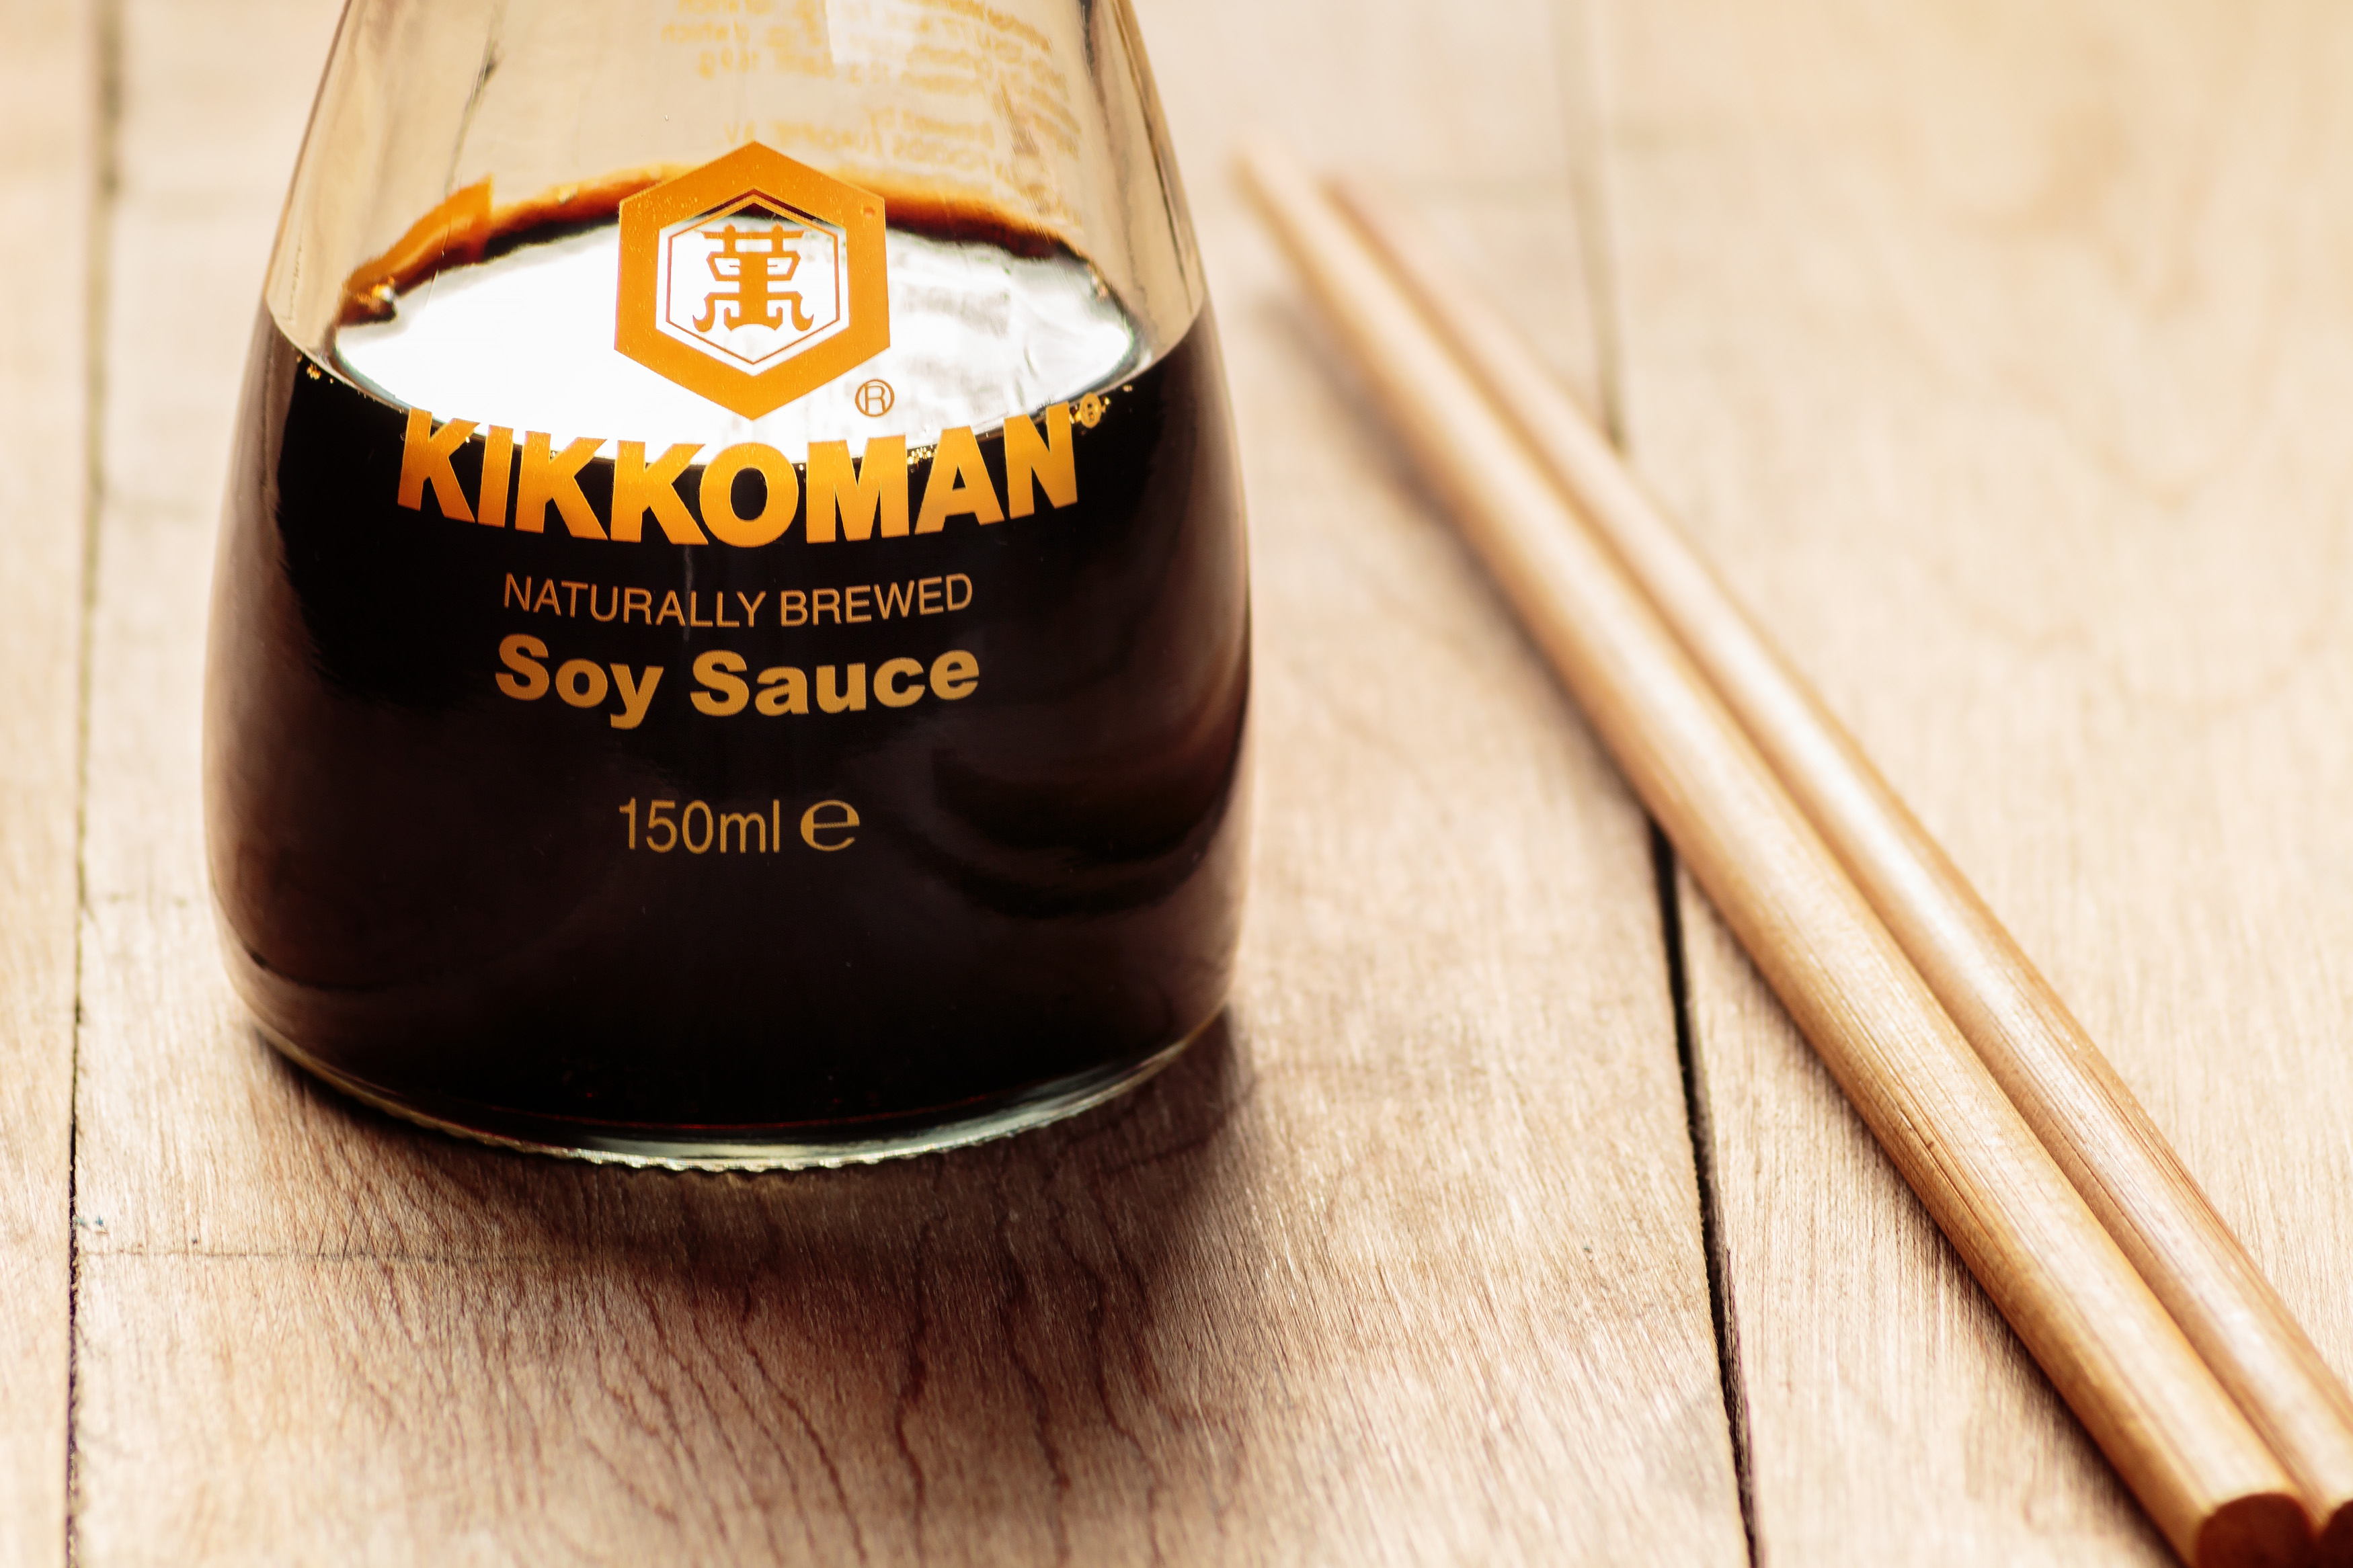 Kikkoman soy sauce bottle with chopsticks on wooden surface, related to culinary businesses